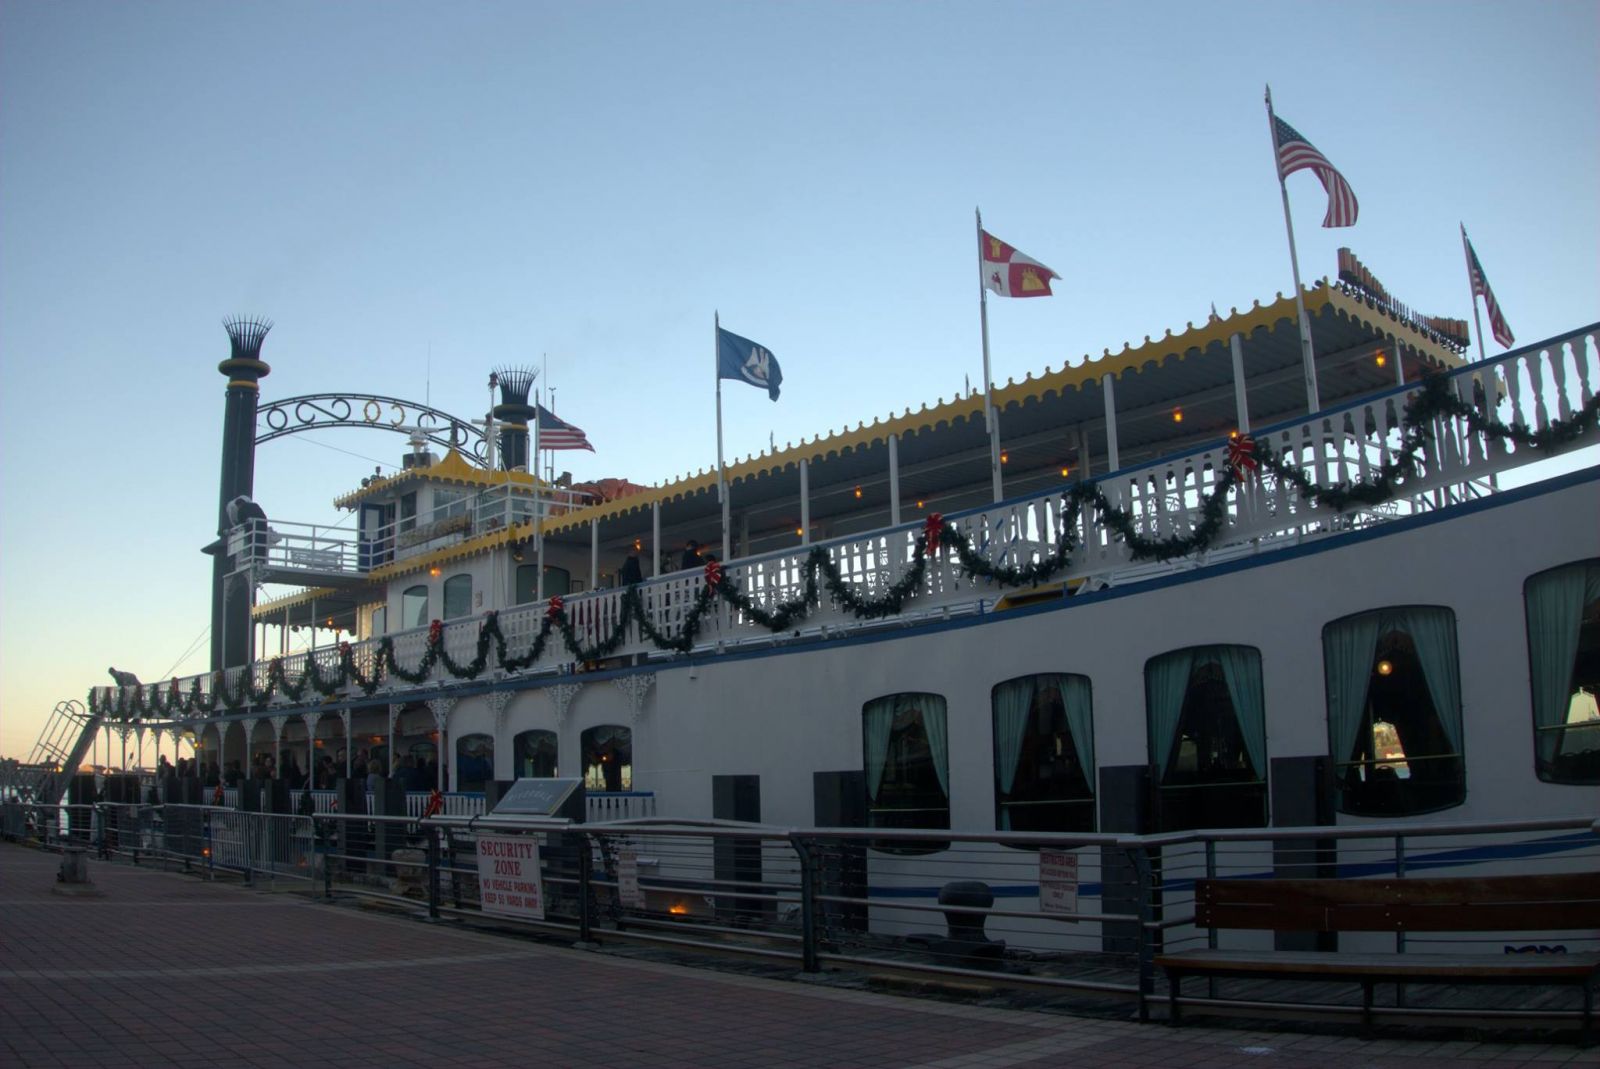 creole queen holiday cruise